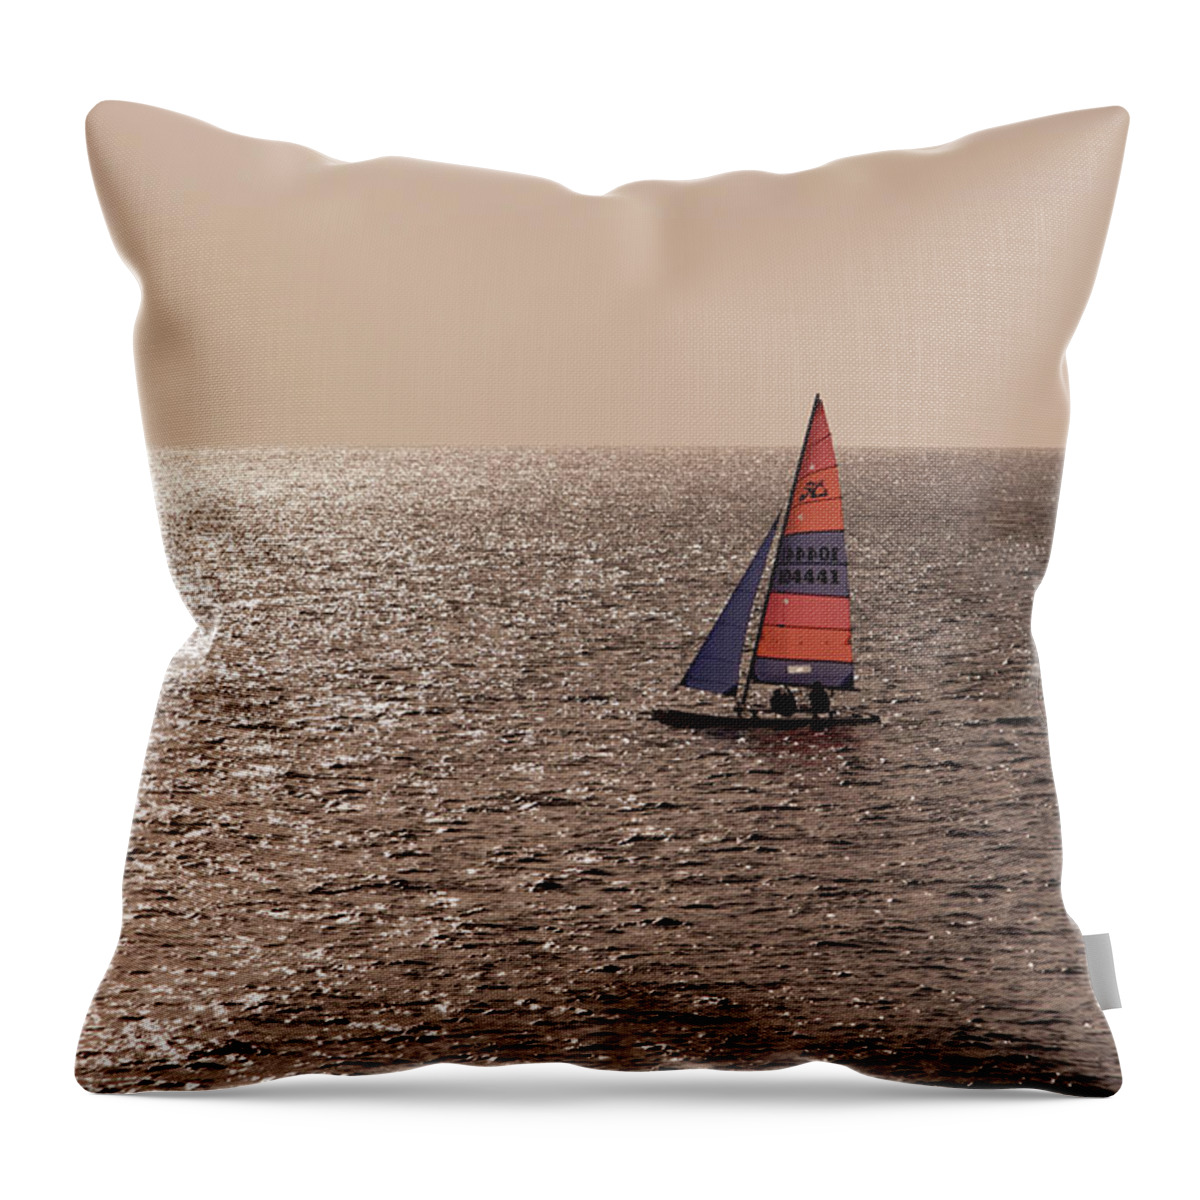 Tranquility Throw Pillow featuring the photograph Hobie Cat Sailboat At Sunset by Holger Leue